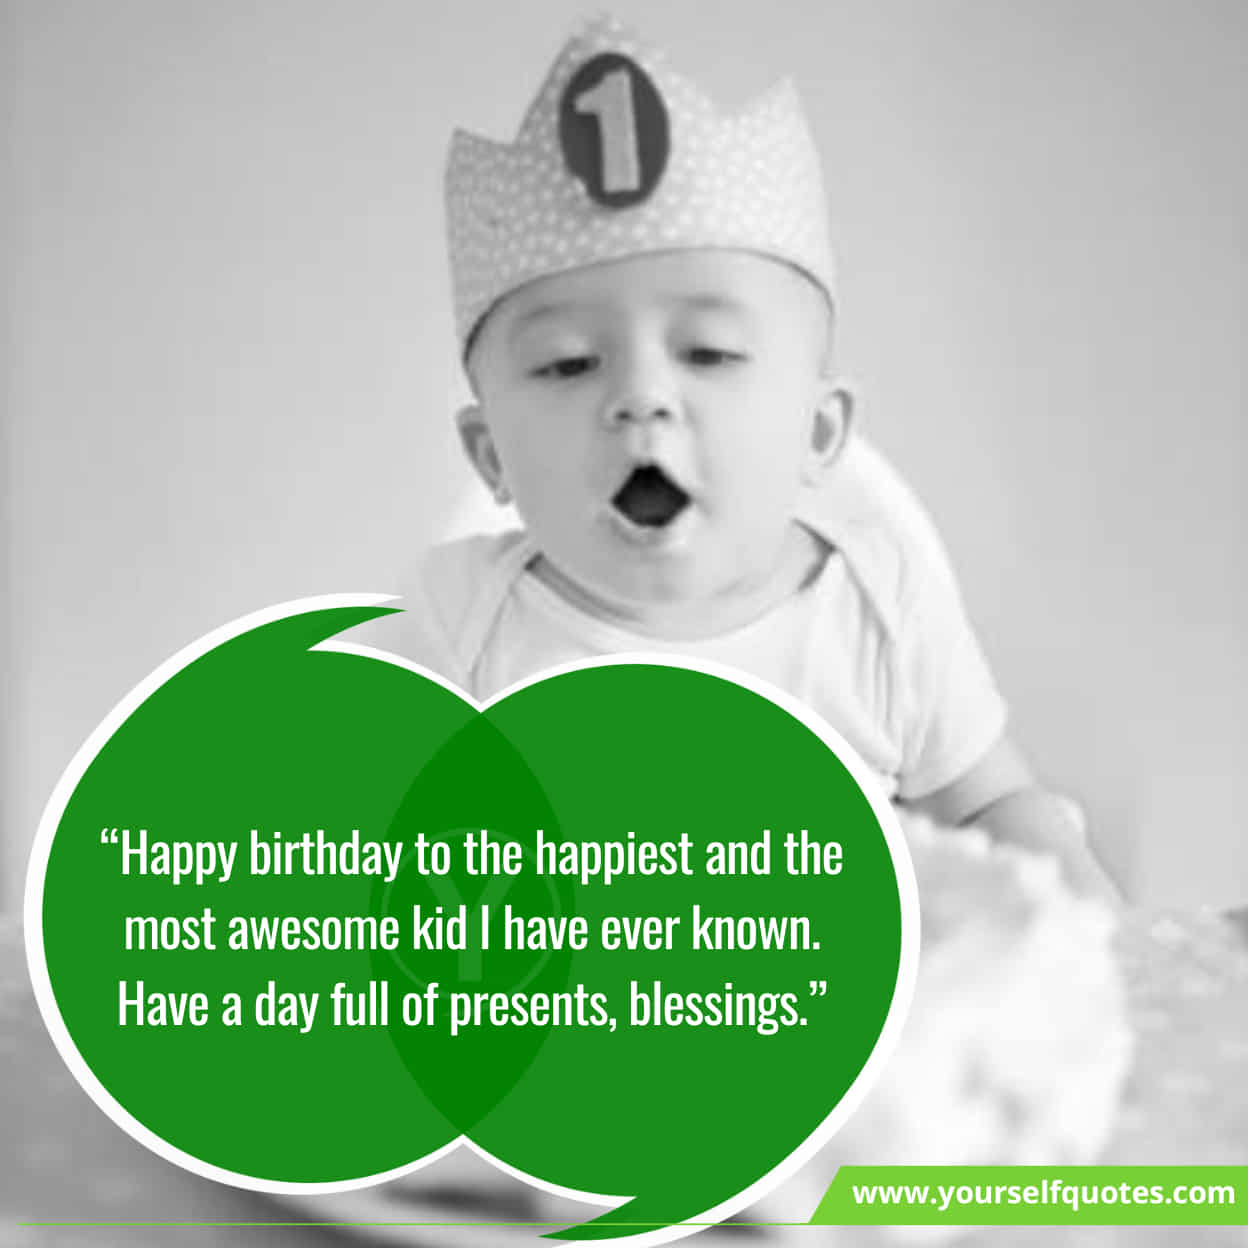 Exciting Birthday Wishes For Baby Boy